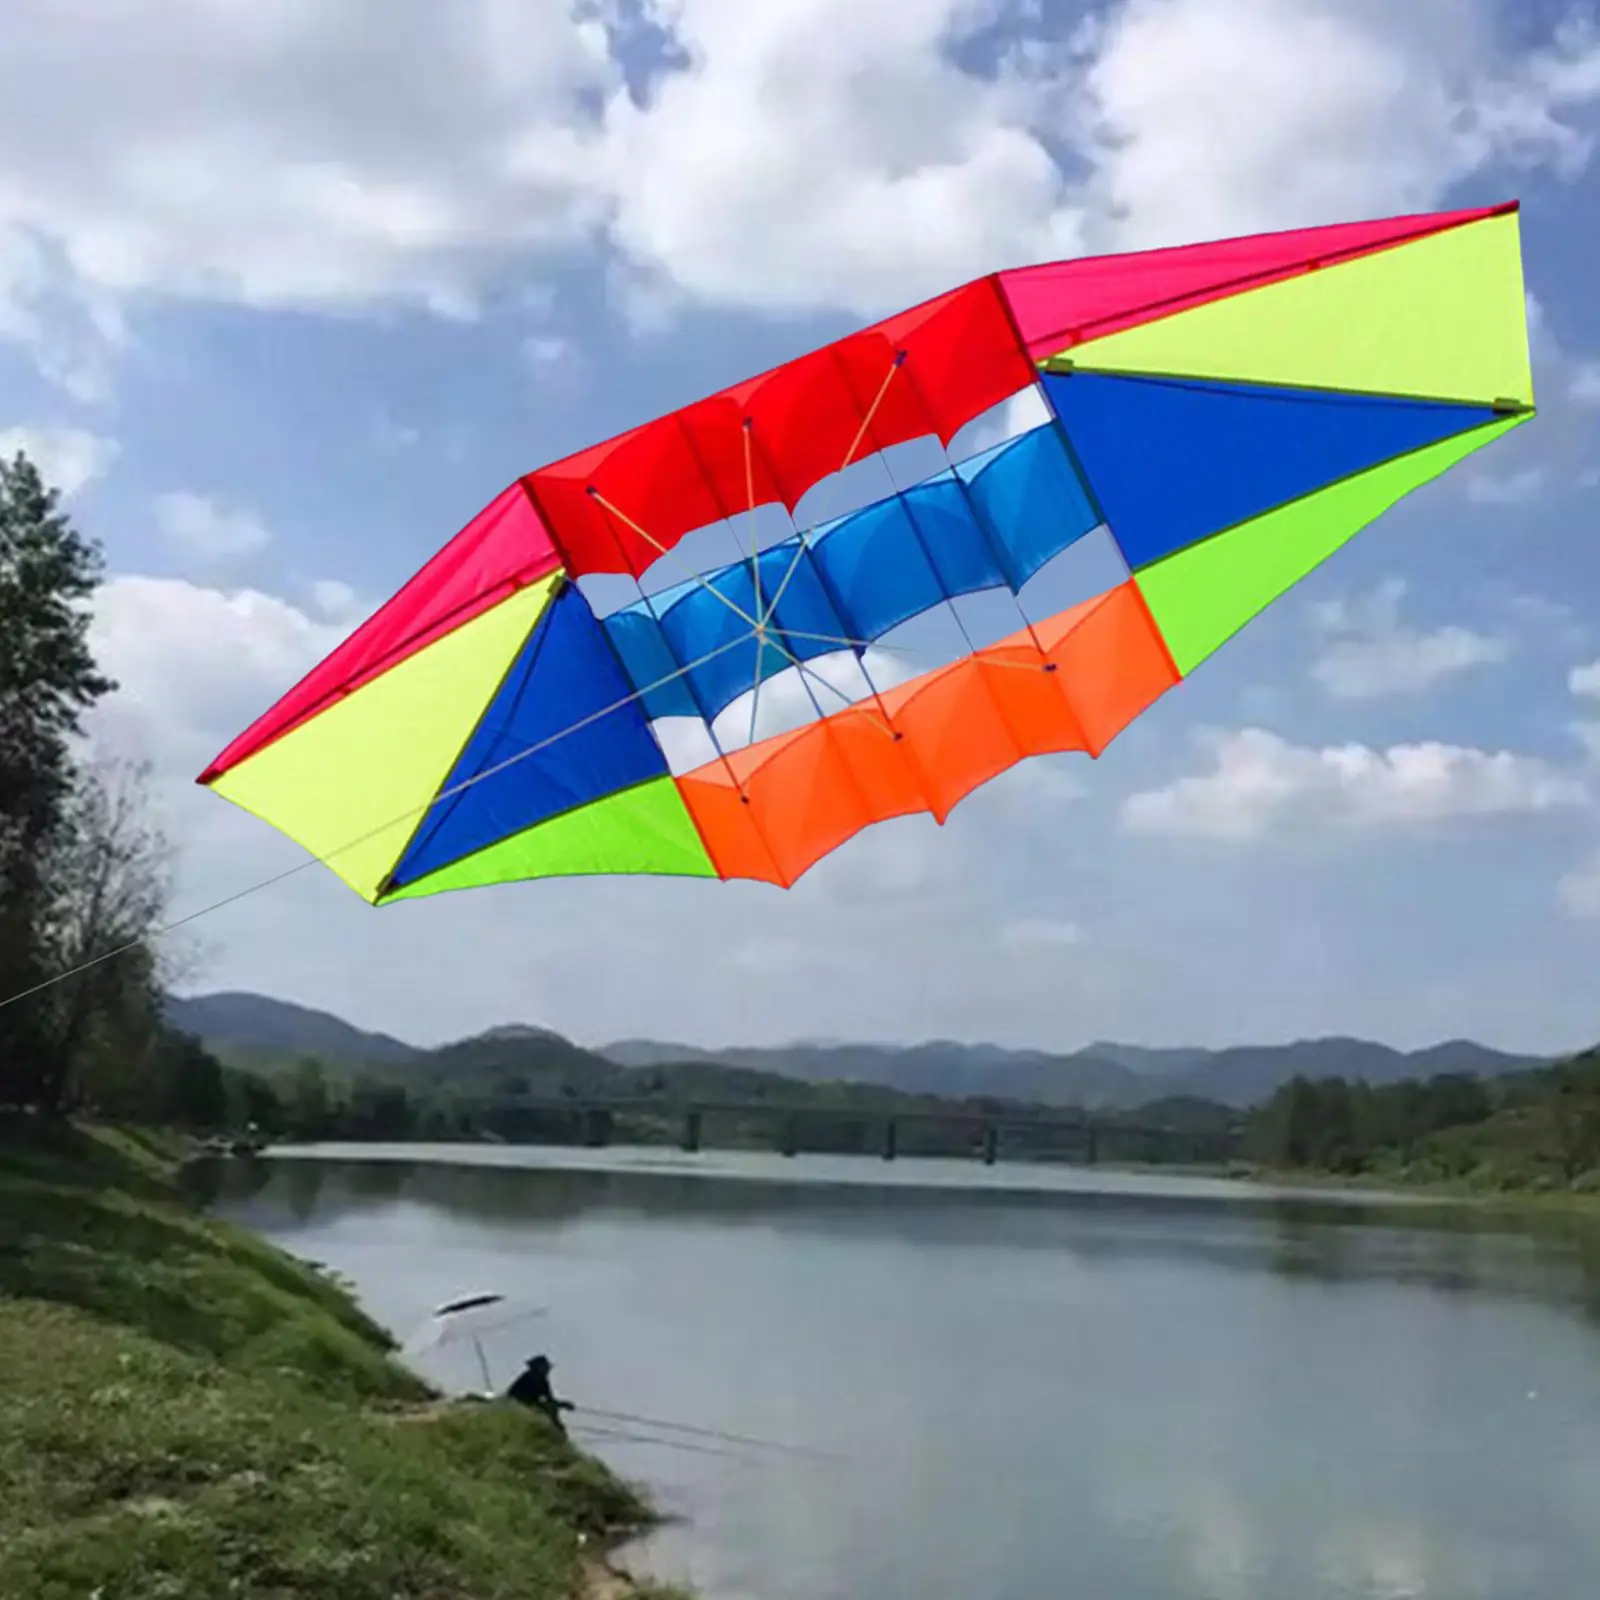 Large Single Line s Outdoor Easy to Fly Parachute Colorful  Toy Surfing  Adults Girls Boys